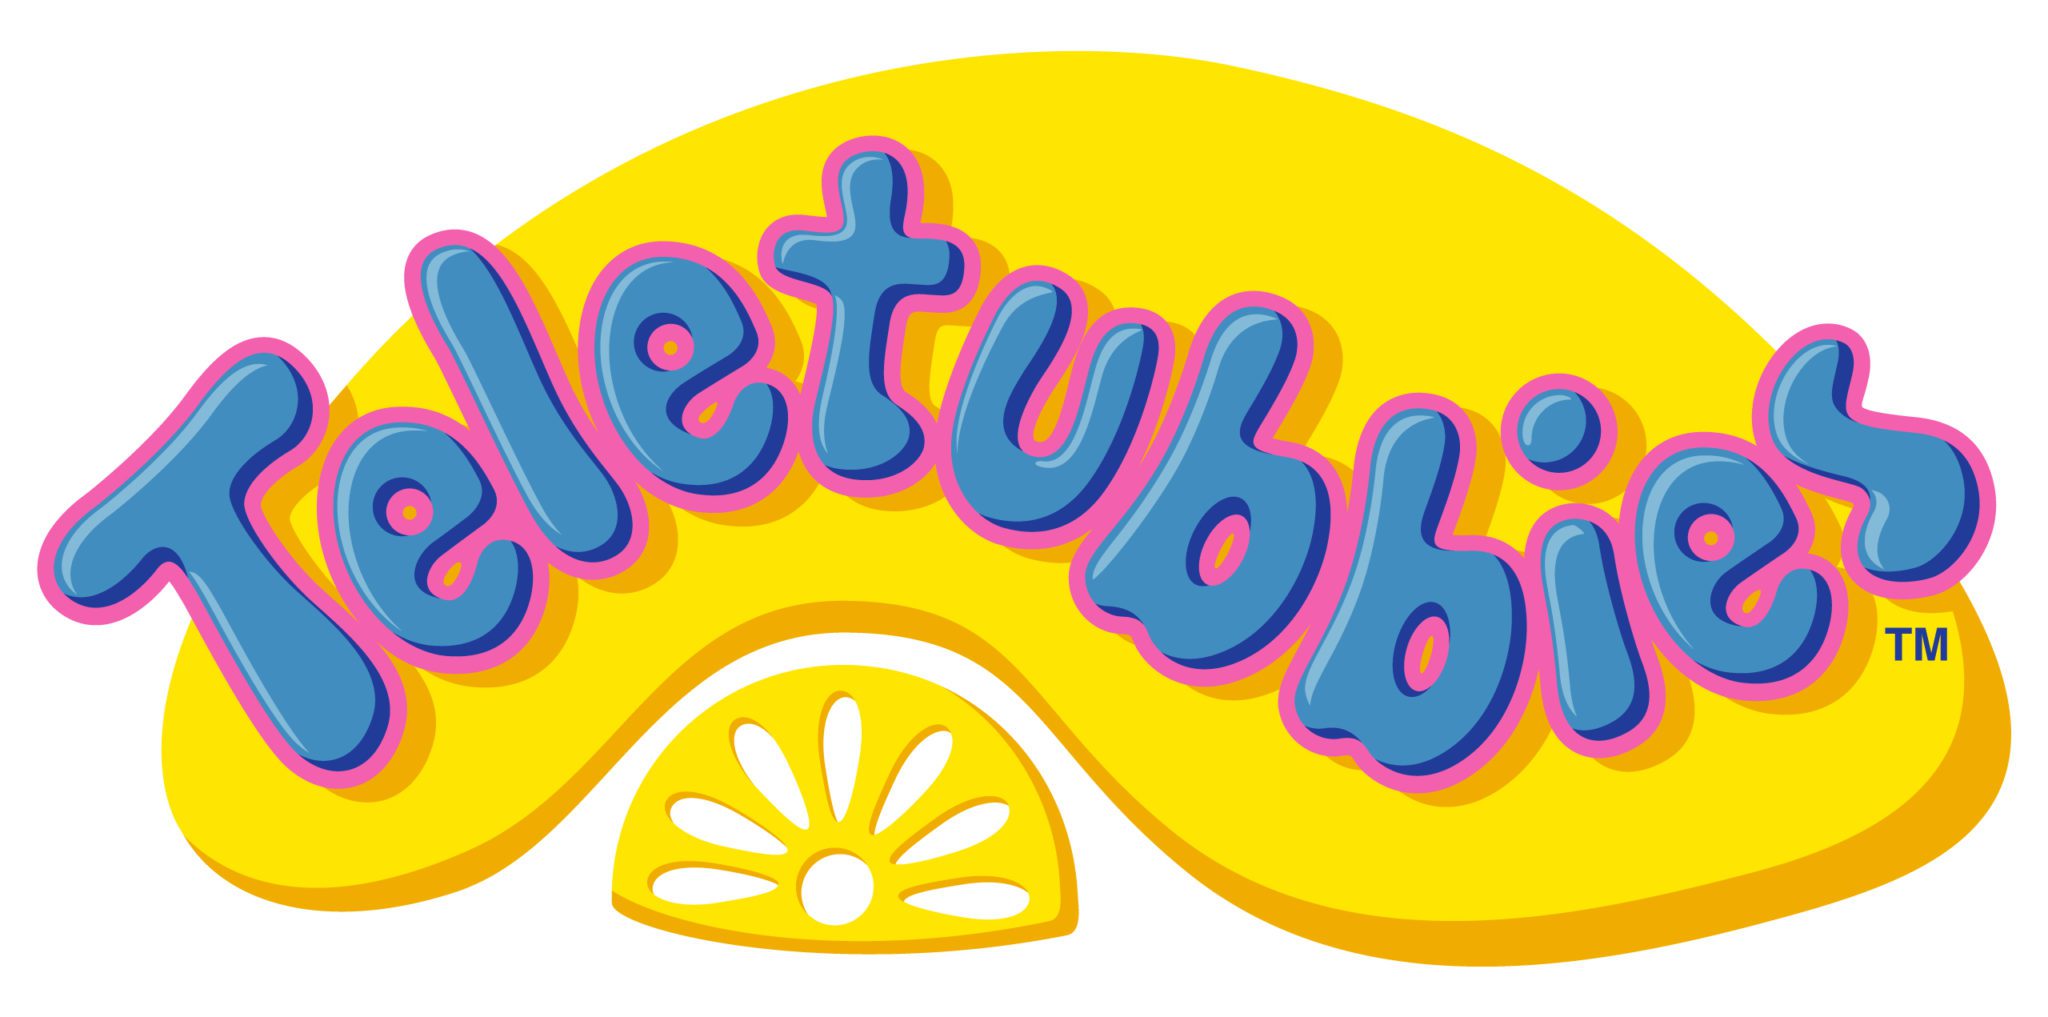 This is an image of the Teletubbies logo.